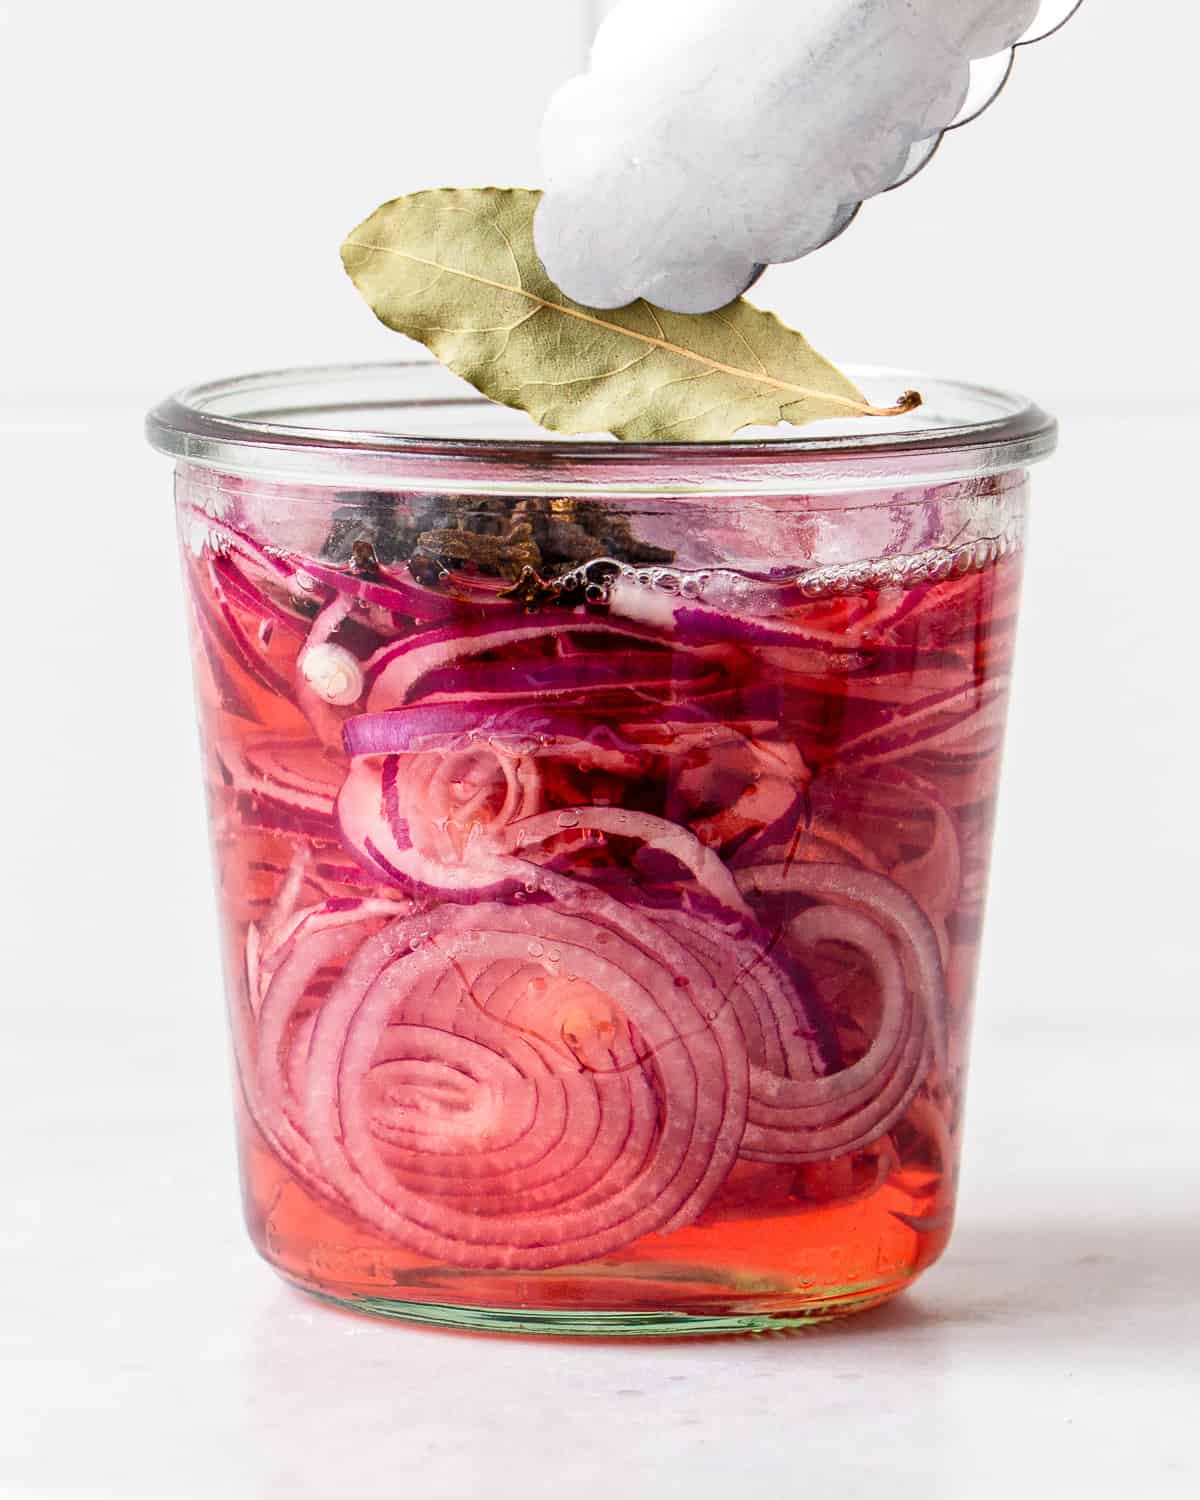 Sliced red onions in vinegar brine with black pepper, cloves and a bay leaf.